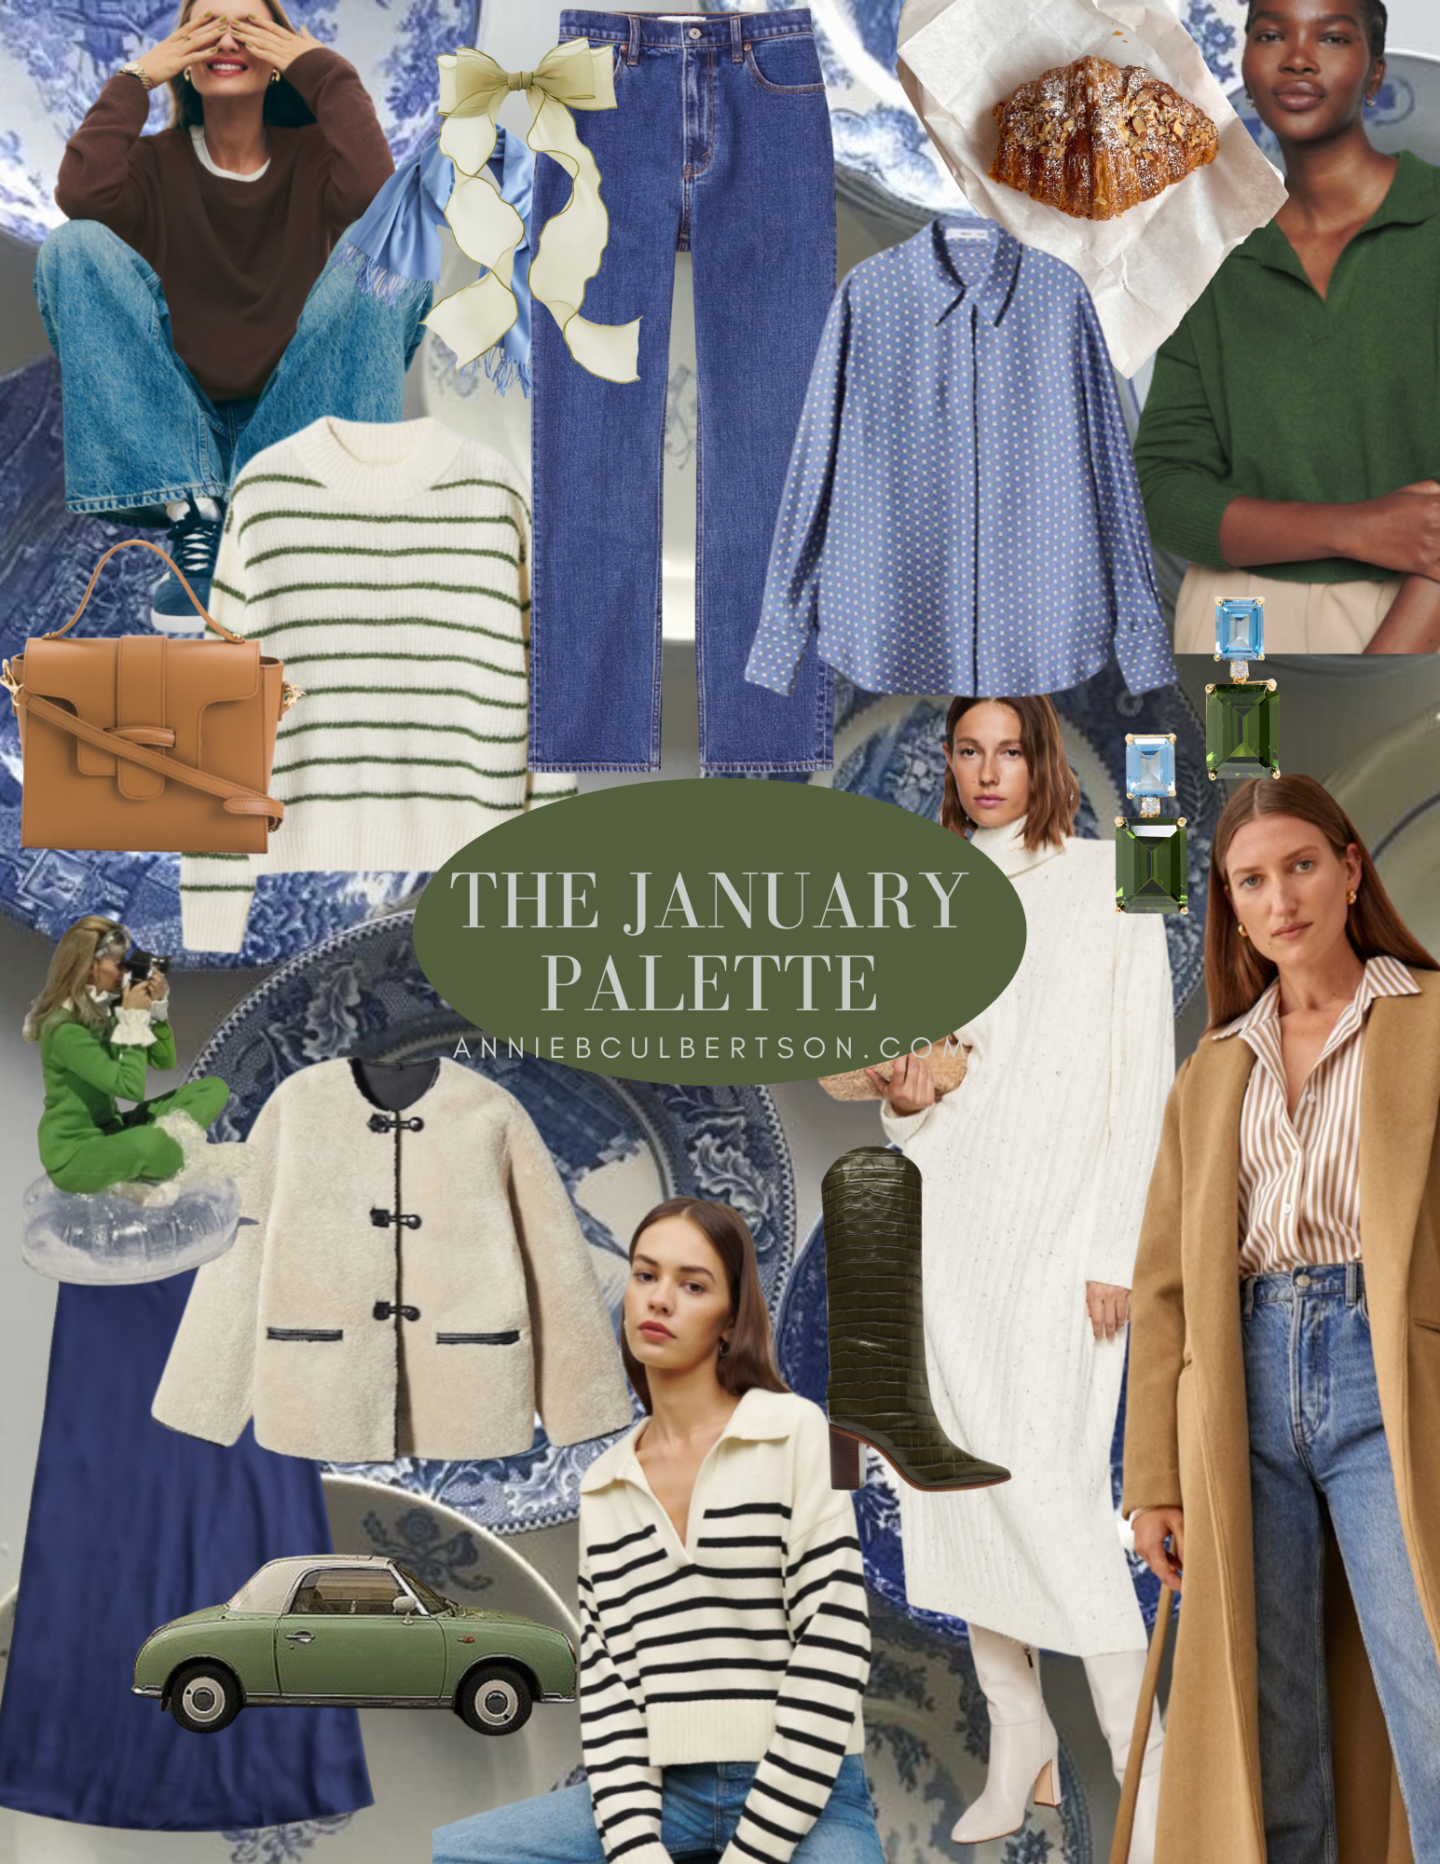 The January Palette.